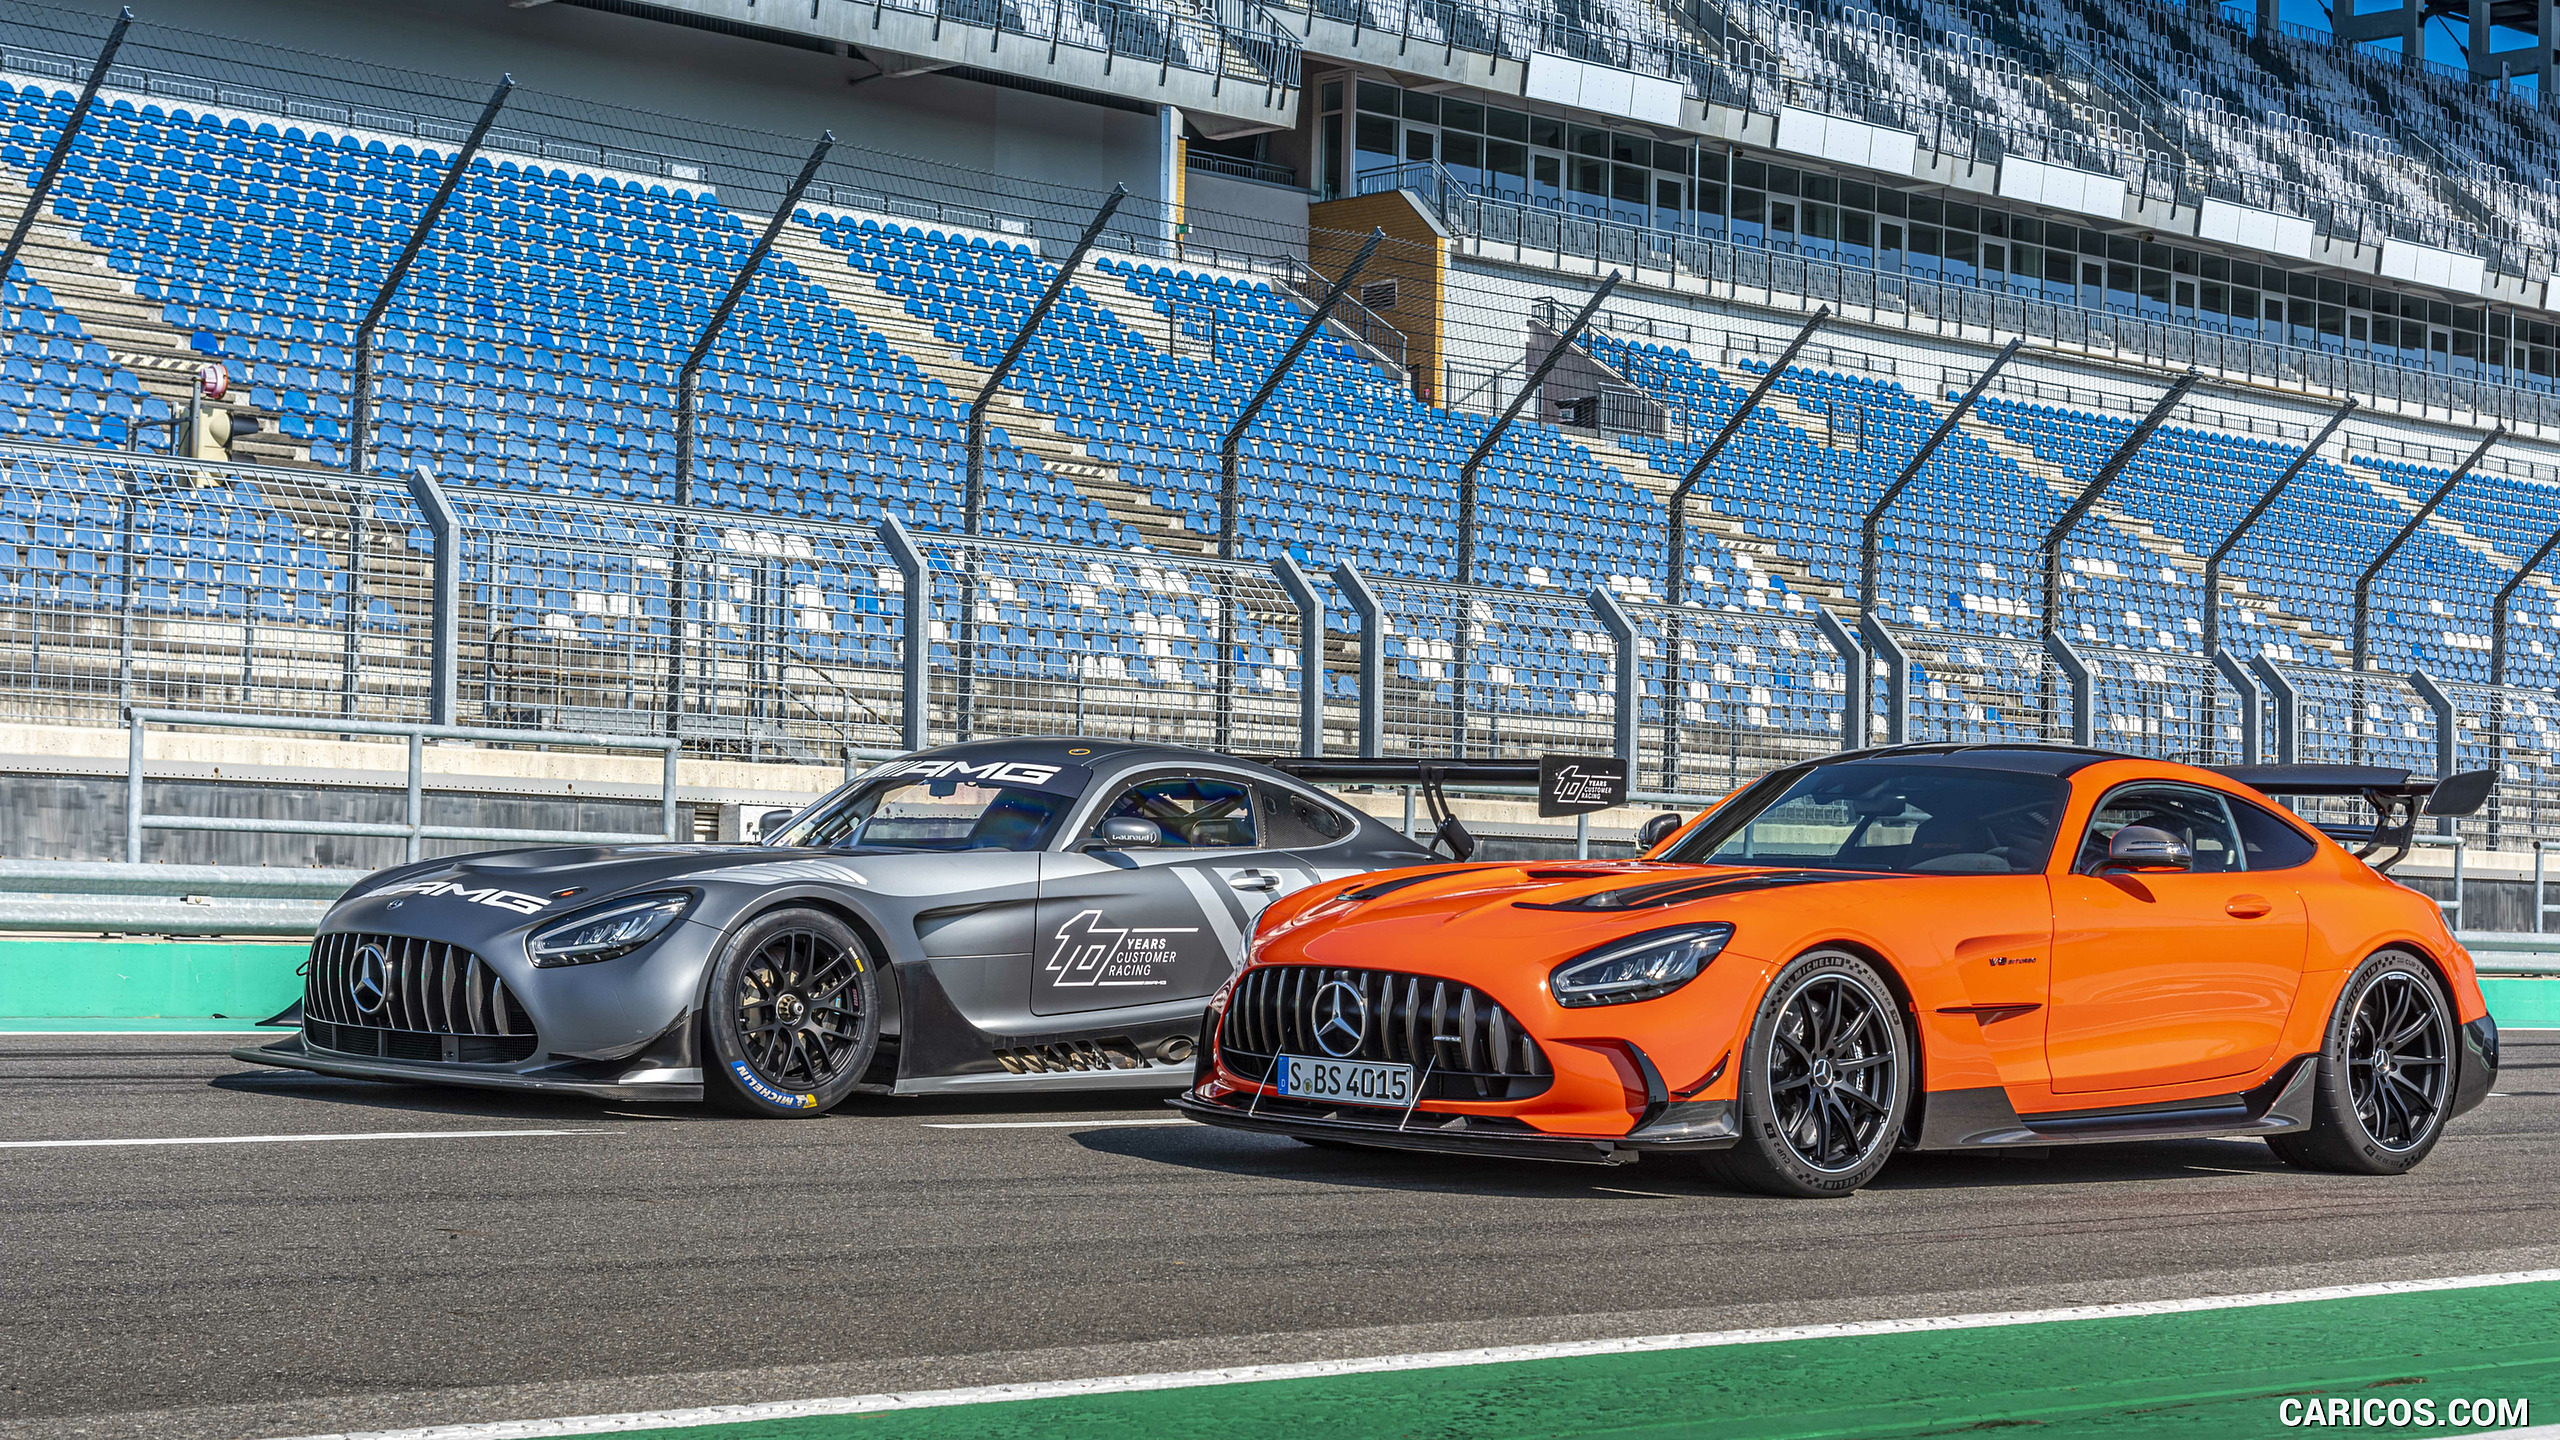 2021 Mercedes-AMG GT Black Series (Color: Magma Beam) and AMG GT3 Racing Car, #148 of 215